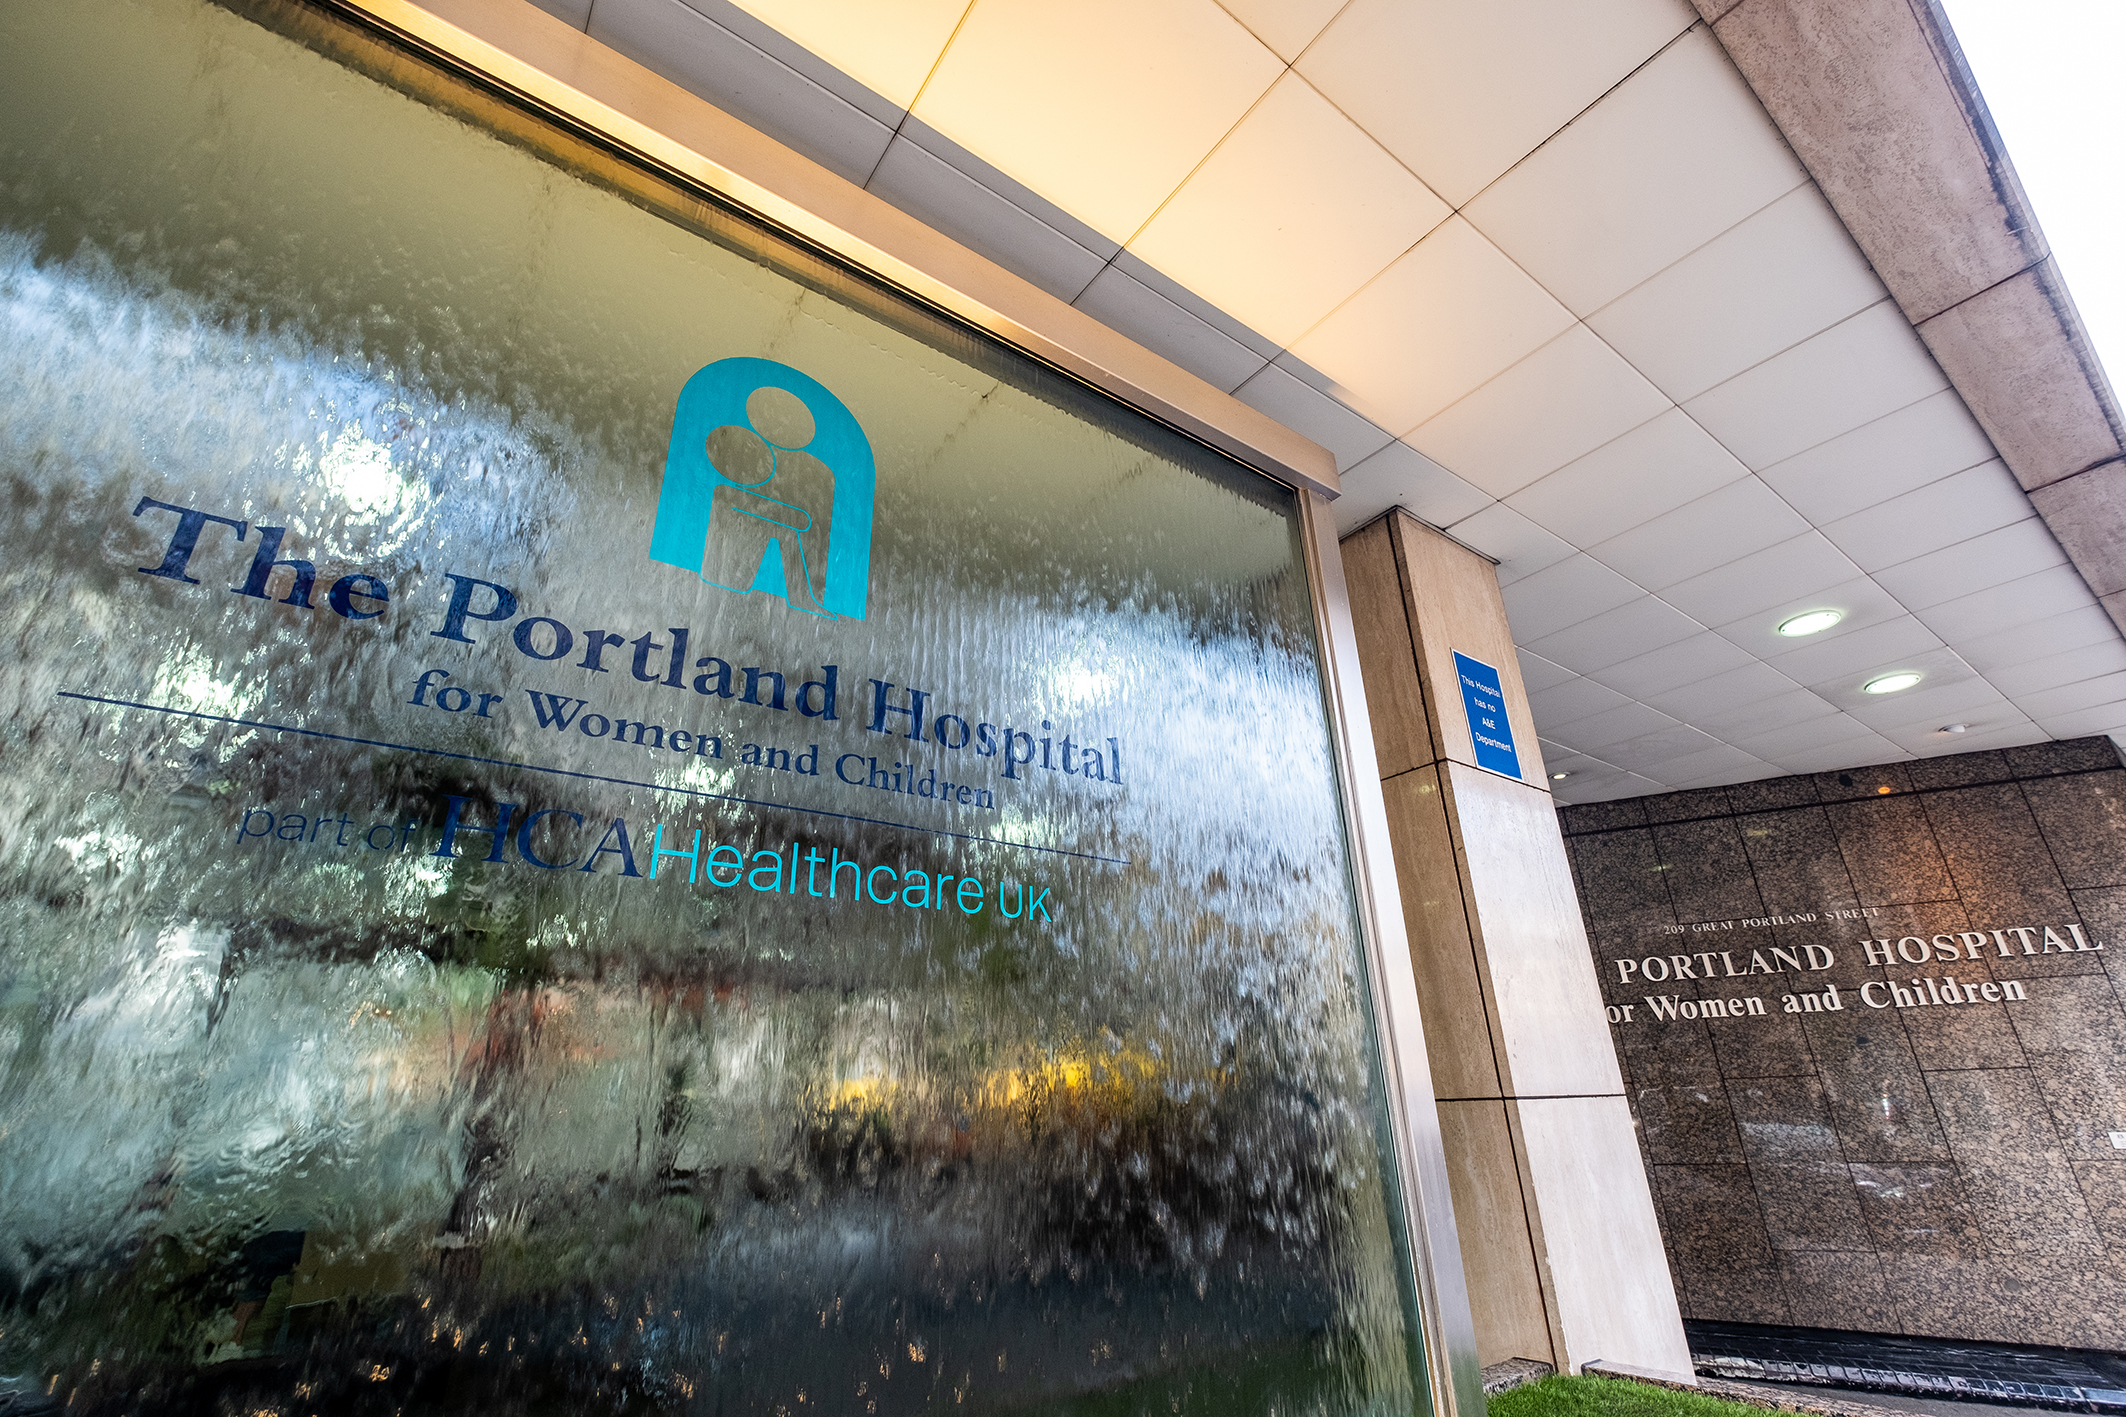 PTSG conducts specialist tests at The Portland Hospital